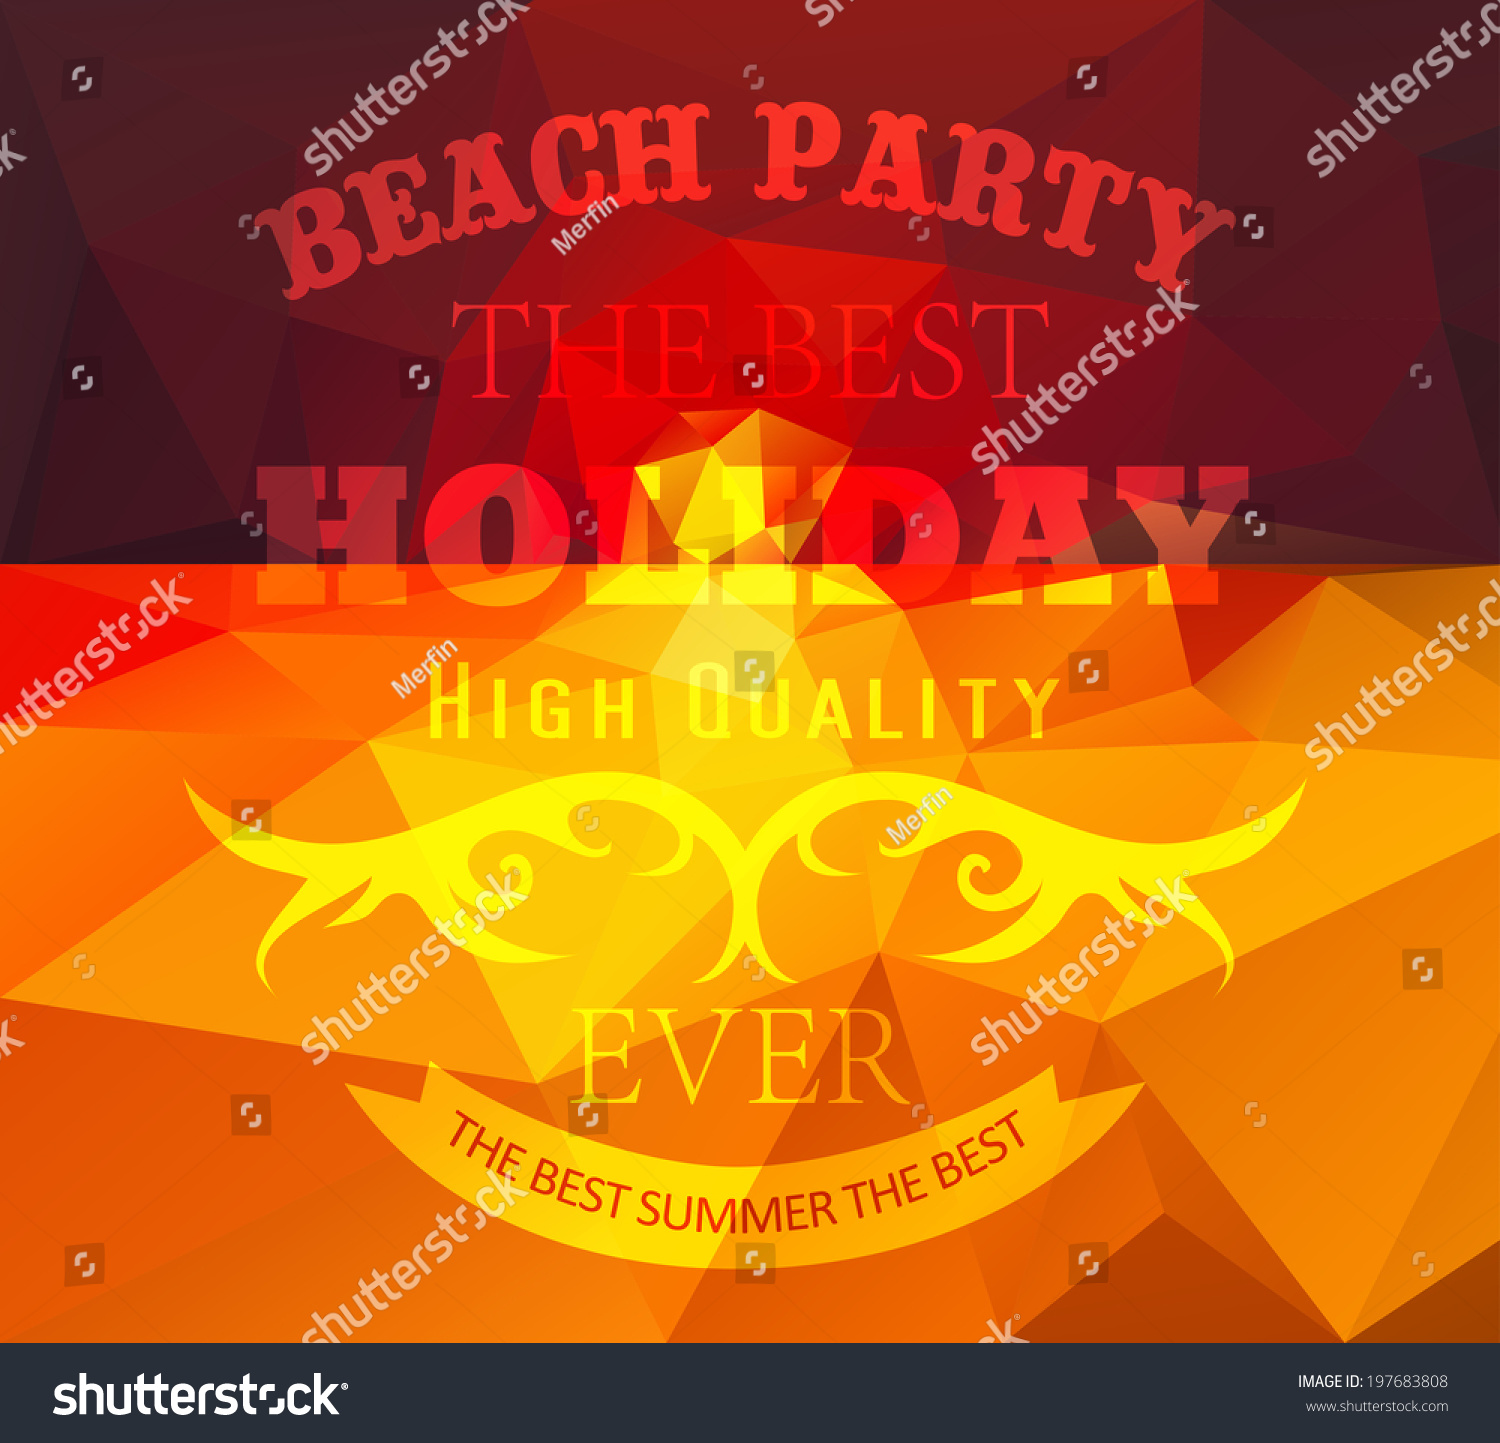 Polygonal seaside view summer poster  with typography elements. Polygonal background illustration #197683808